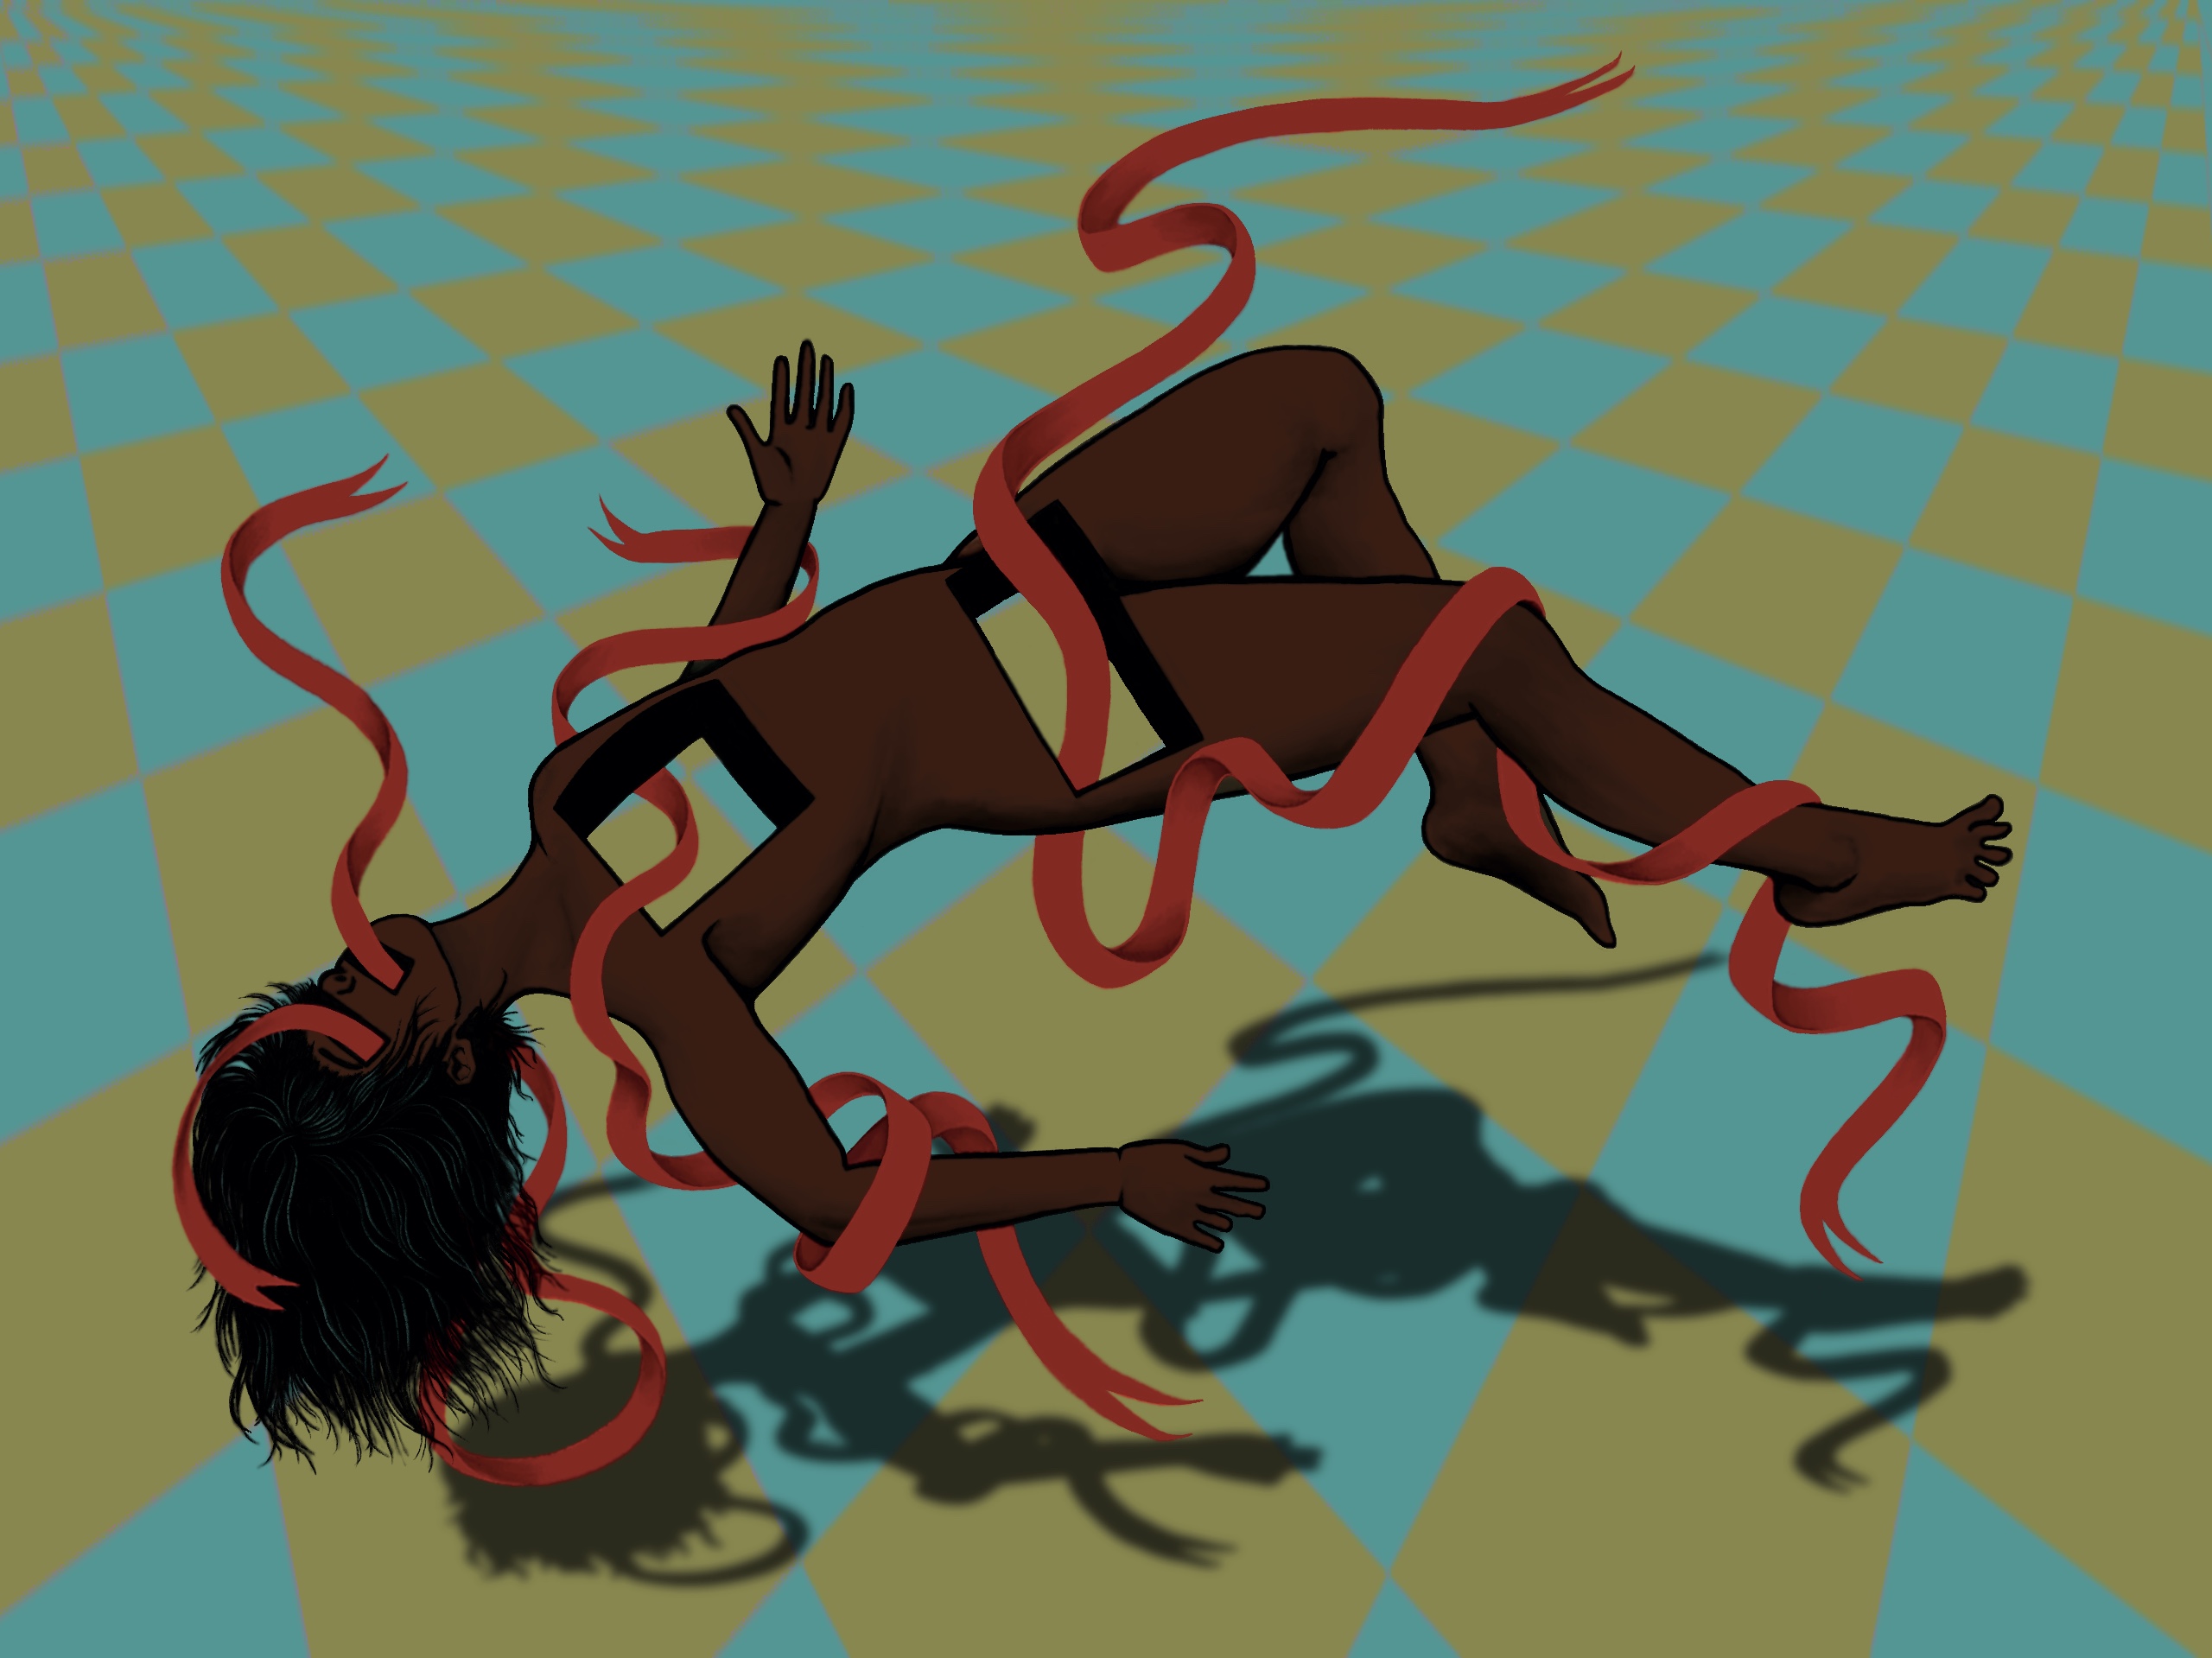 Image: Above a teal and olive green checked floor, a nude Black person floats in the air, their limbs akimbo, with a long red ribbon curling around their body and through two clean square cuts in their chest and in their hips. One ribbon also curves through their mouth and eye. Image by Summer Mills.